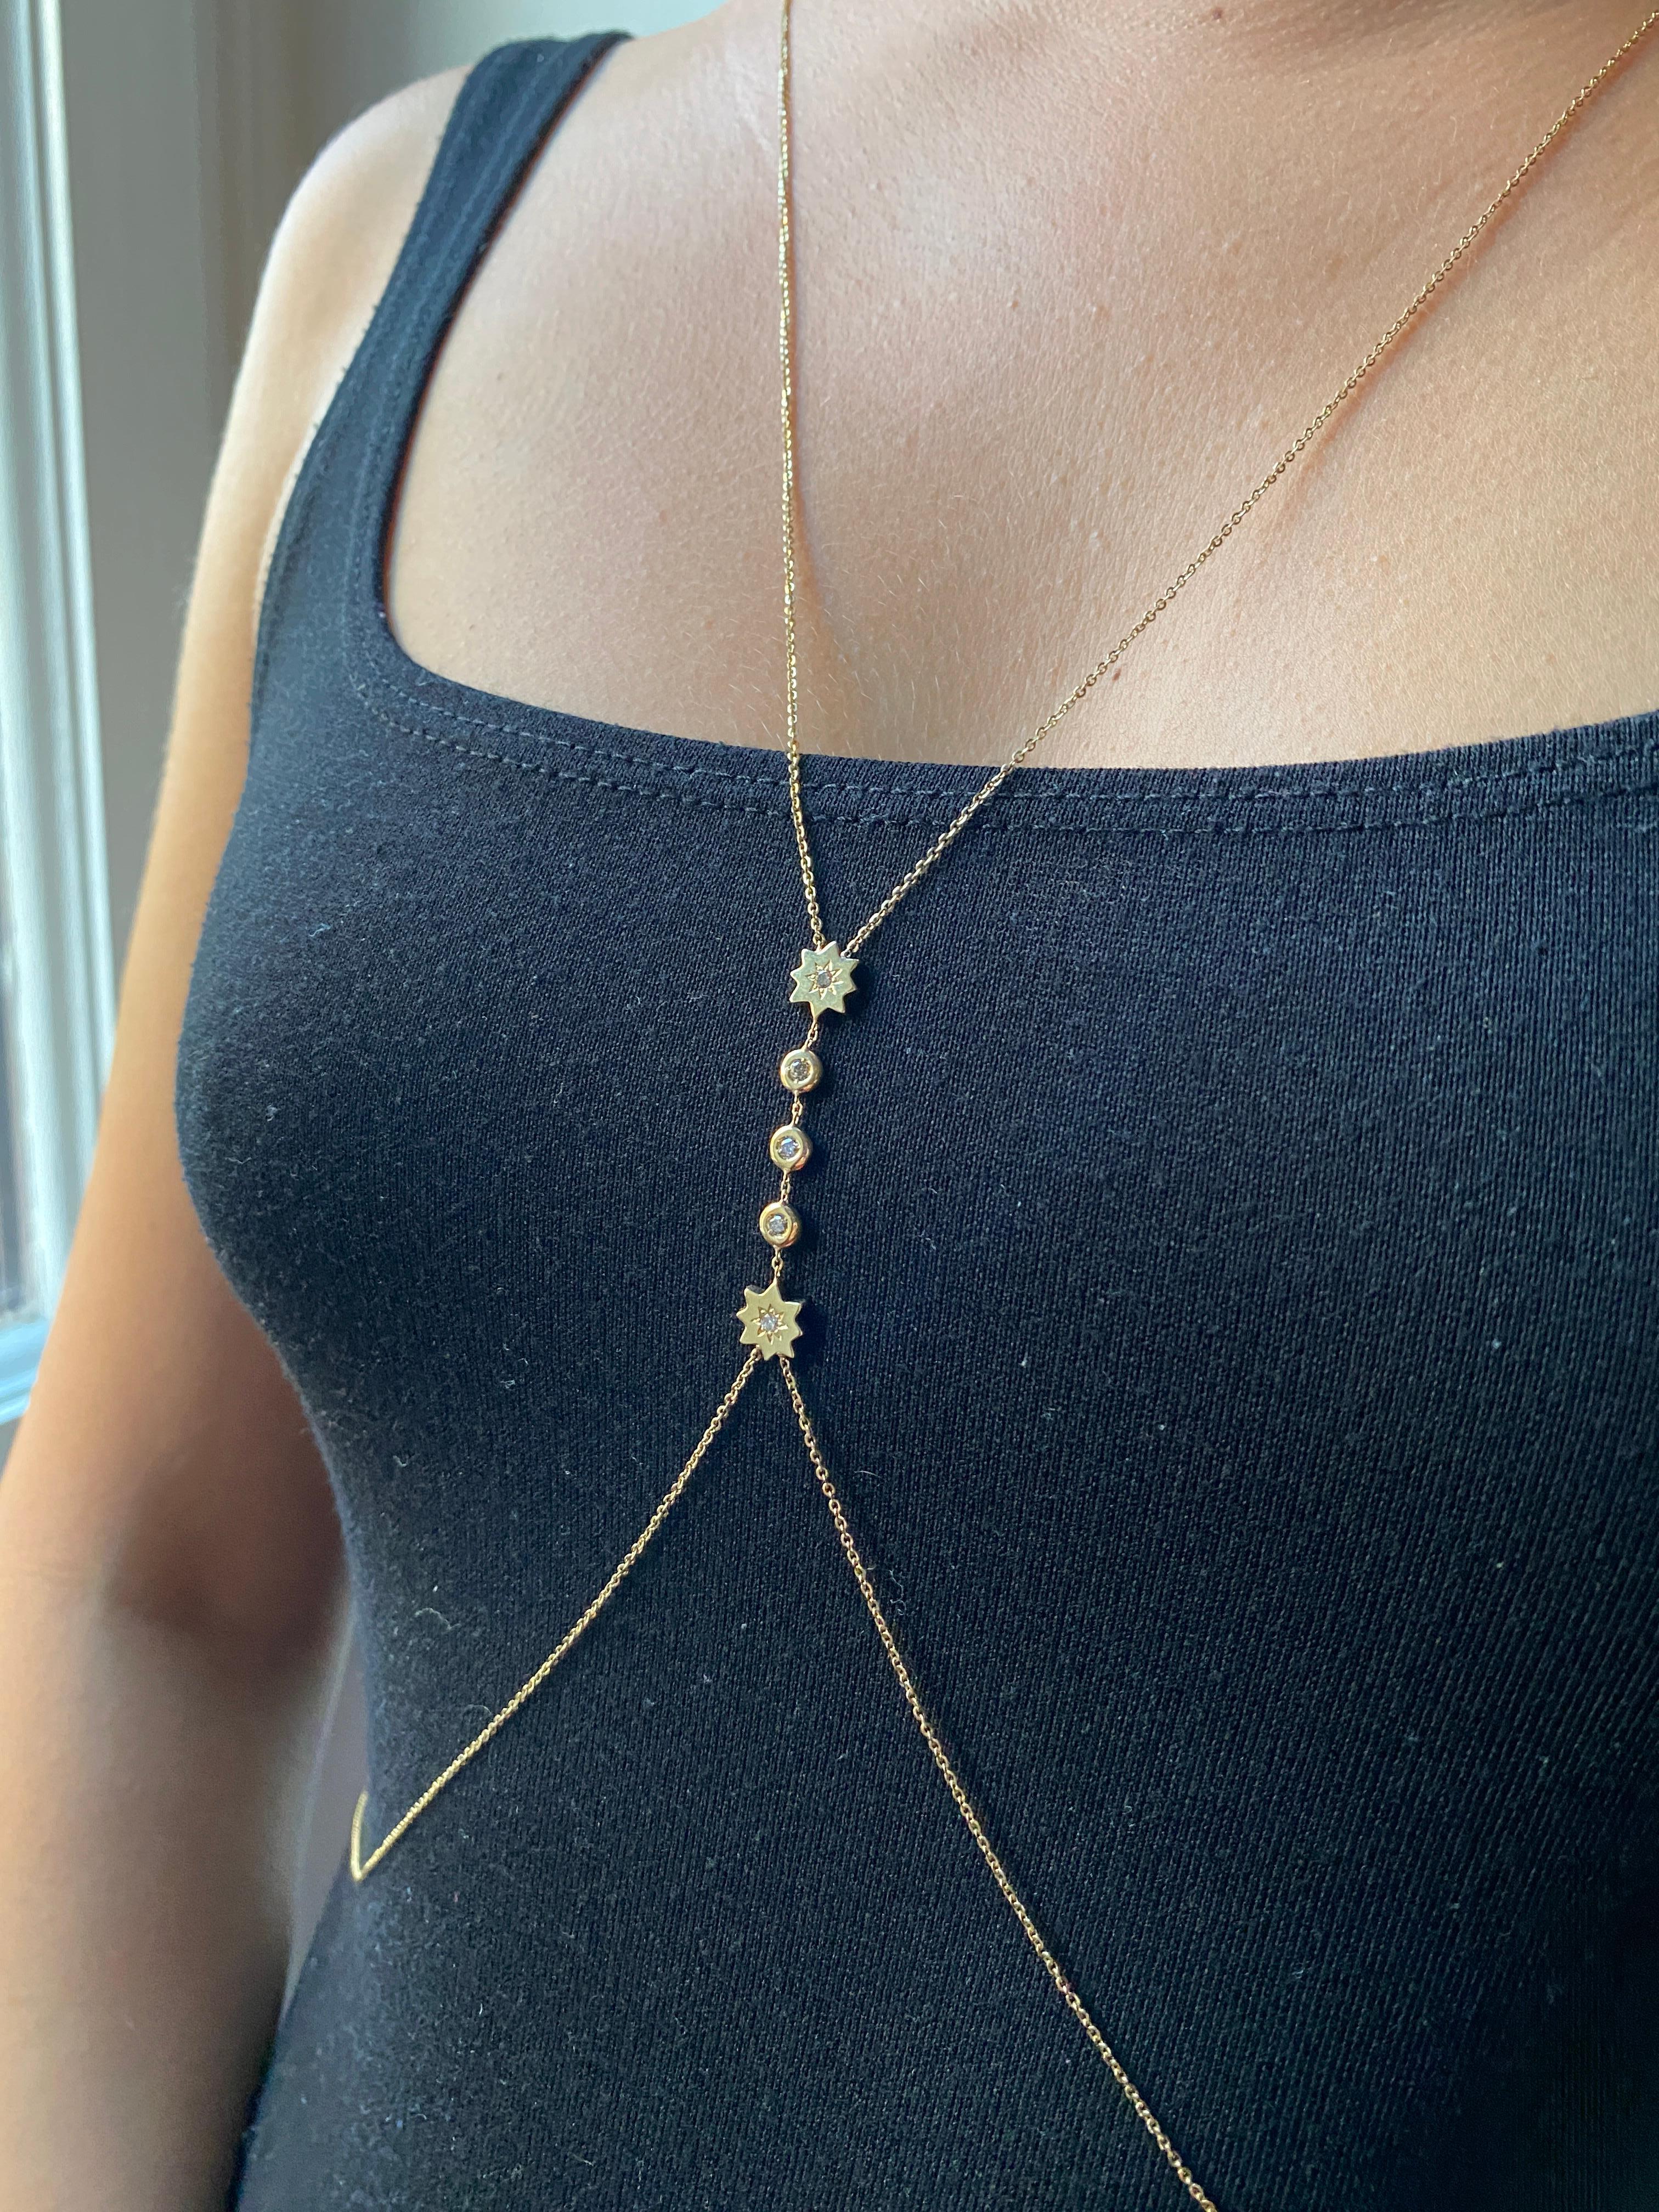 One-of-a-Kind Body Chain Stars 14K Yellow Gold 0.10 Carat White Diamonds Jewel For Sale 5